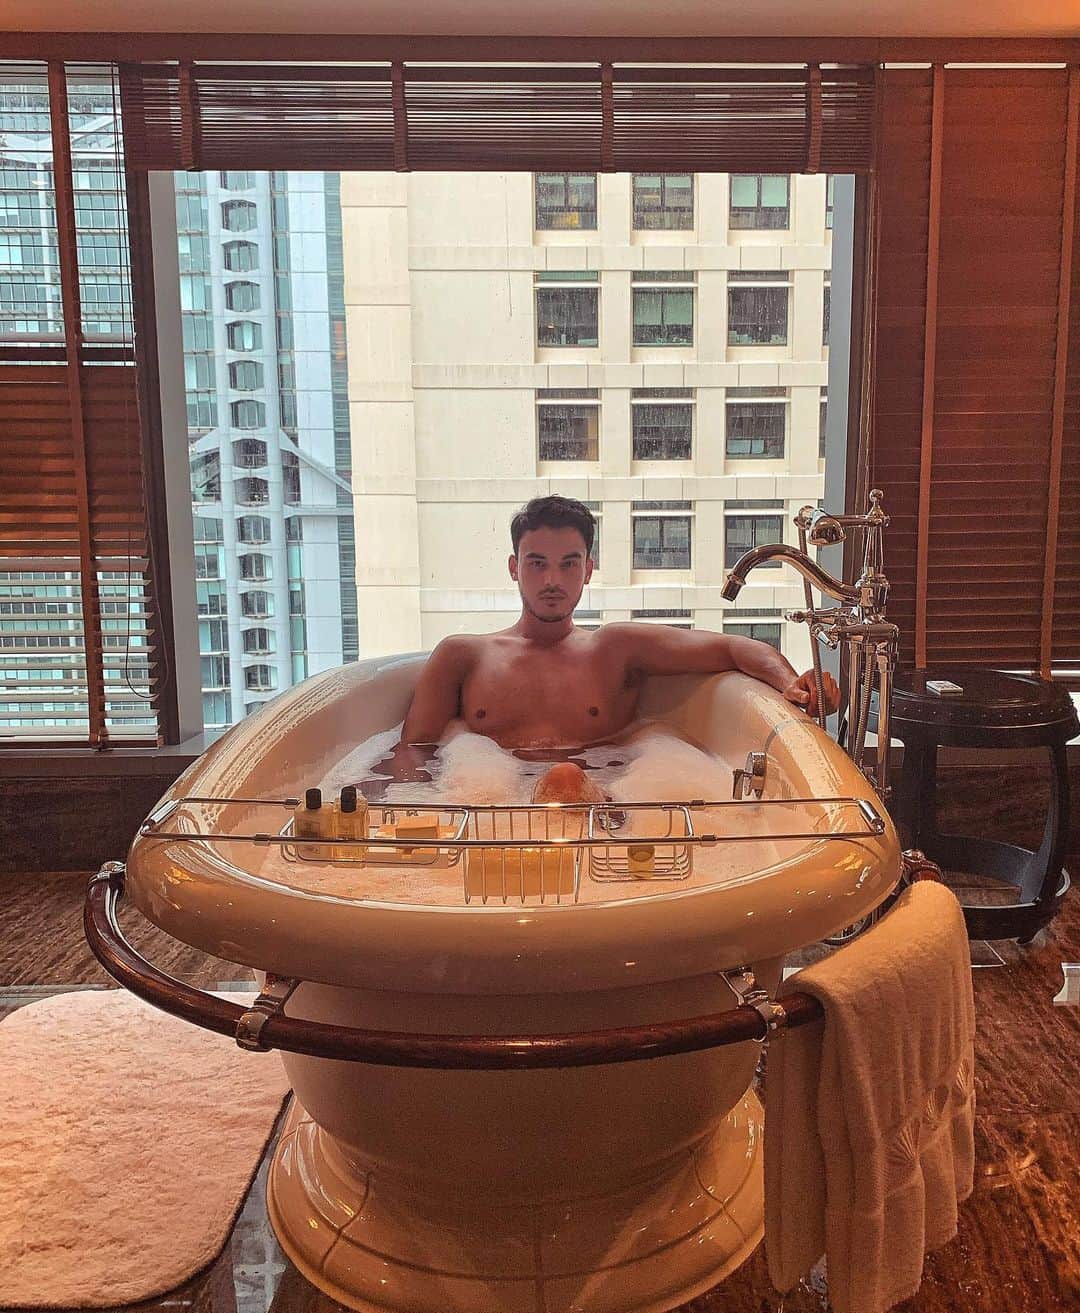 Kam Wai Suenのインスタグラム：「The bathroom from the Statue Square View Suite of @mo_hkg is my absolute bathroom goal.  This bathtub is a must-have for your staycation when you want to relax from your busy week by enjoying one of the best views of Hong Kong.  #ImAFan #mo_hkg #mandarinorientalhongkong  #staycation #hkstaycation #luxurylifestyle #luxuryhomes #bathroomdesign #bathroomdecor #bathtub #hkkol #hkinfluencer #hklifestyle」